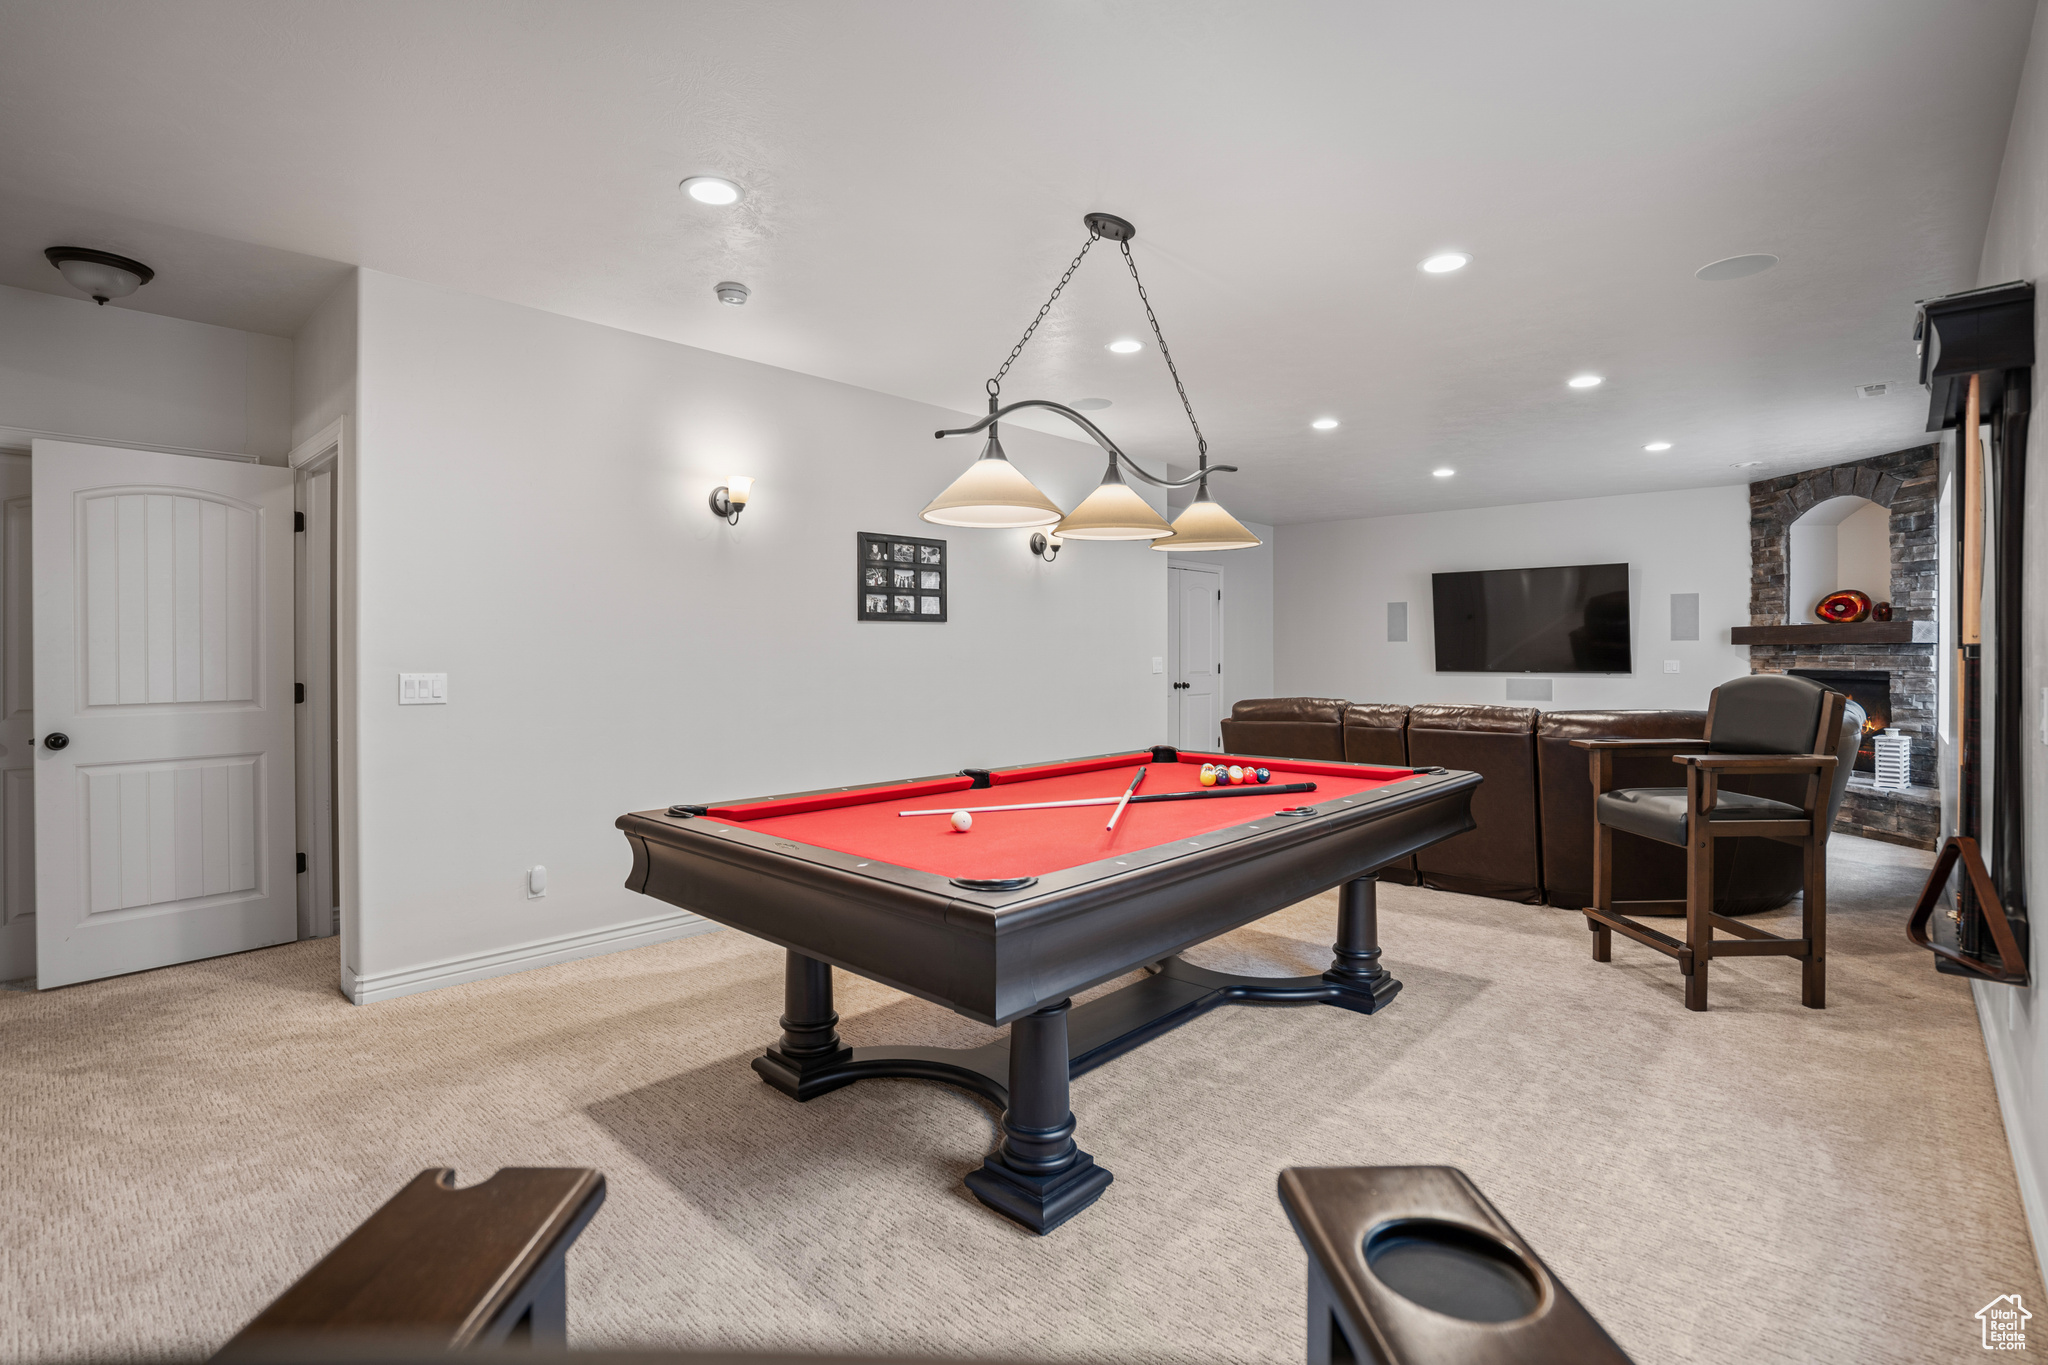 Game room featuring light carpet, pool table, and a fireplace